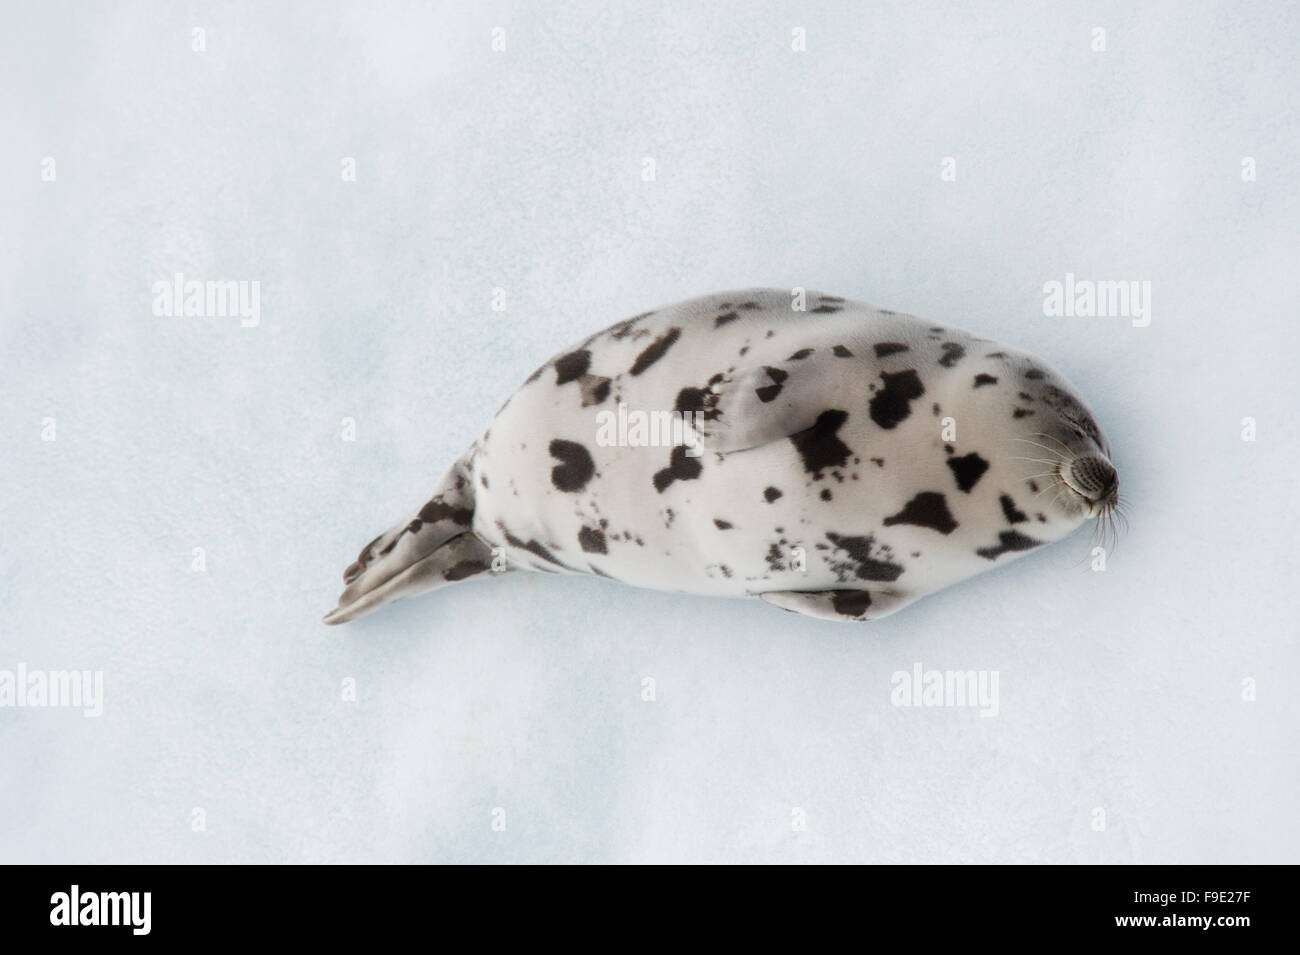 A young Harp Seal (Pagophilus groenlandicus) sleeps on an iceberg in the North Atlantic Stock Photo